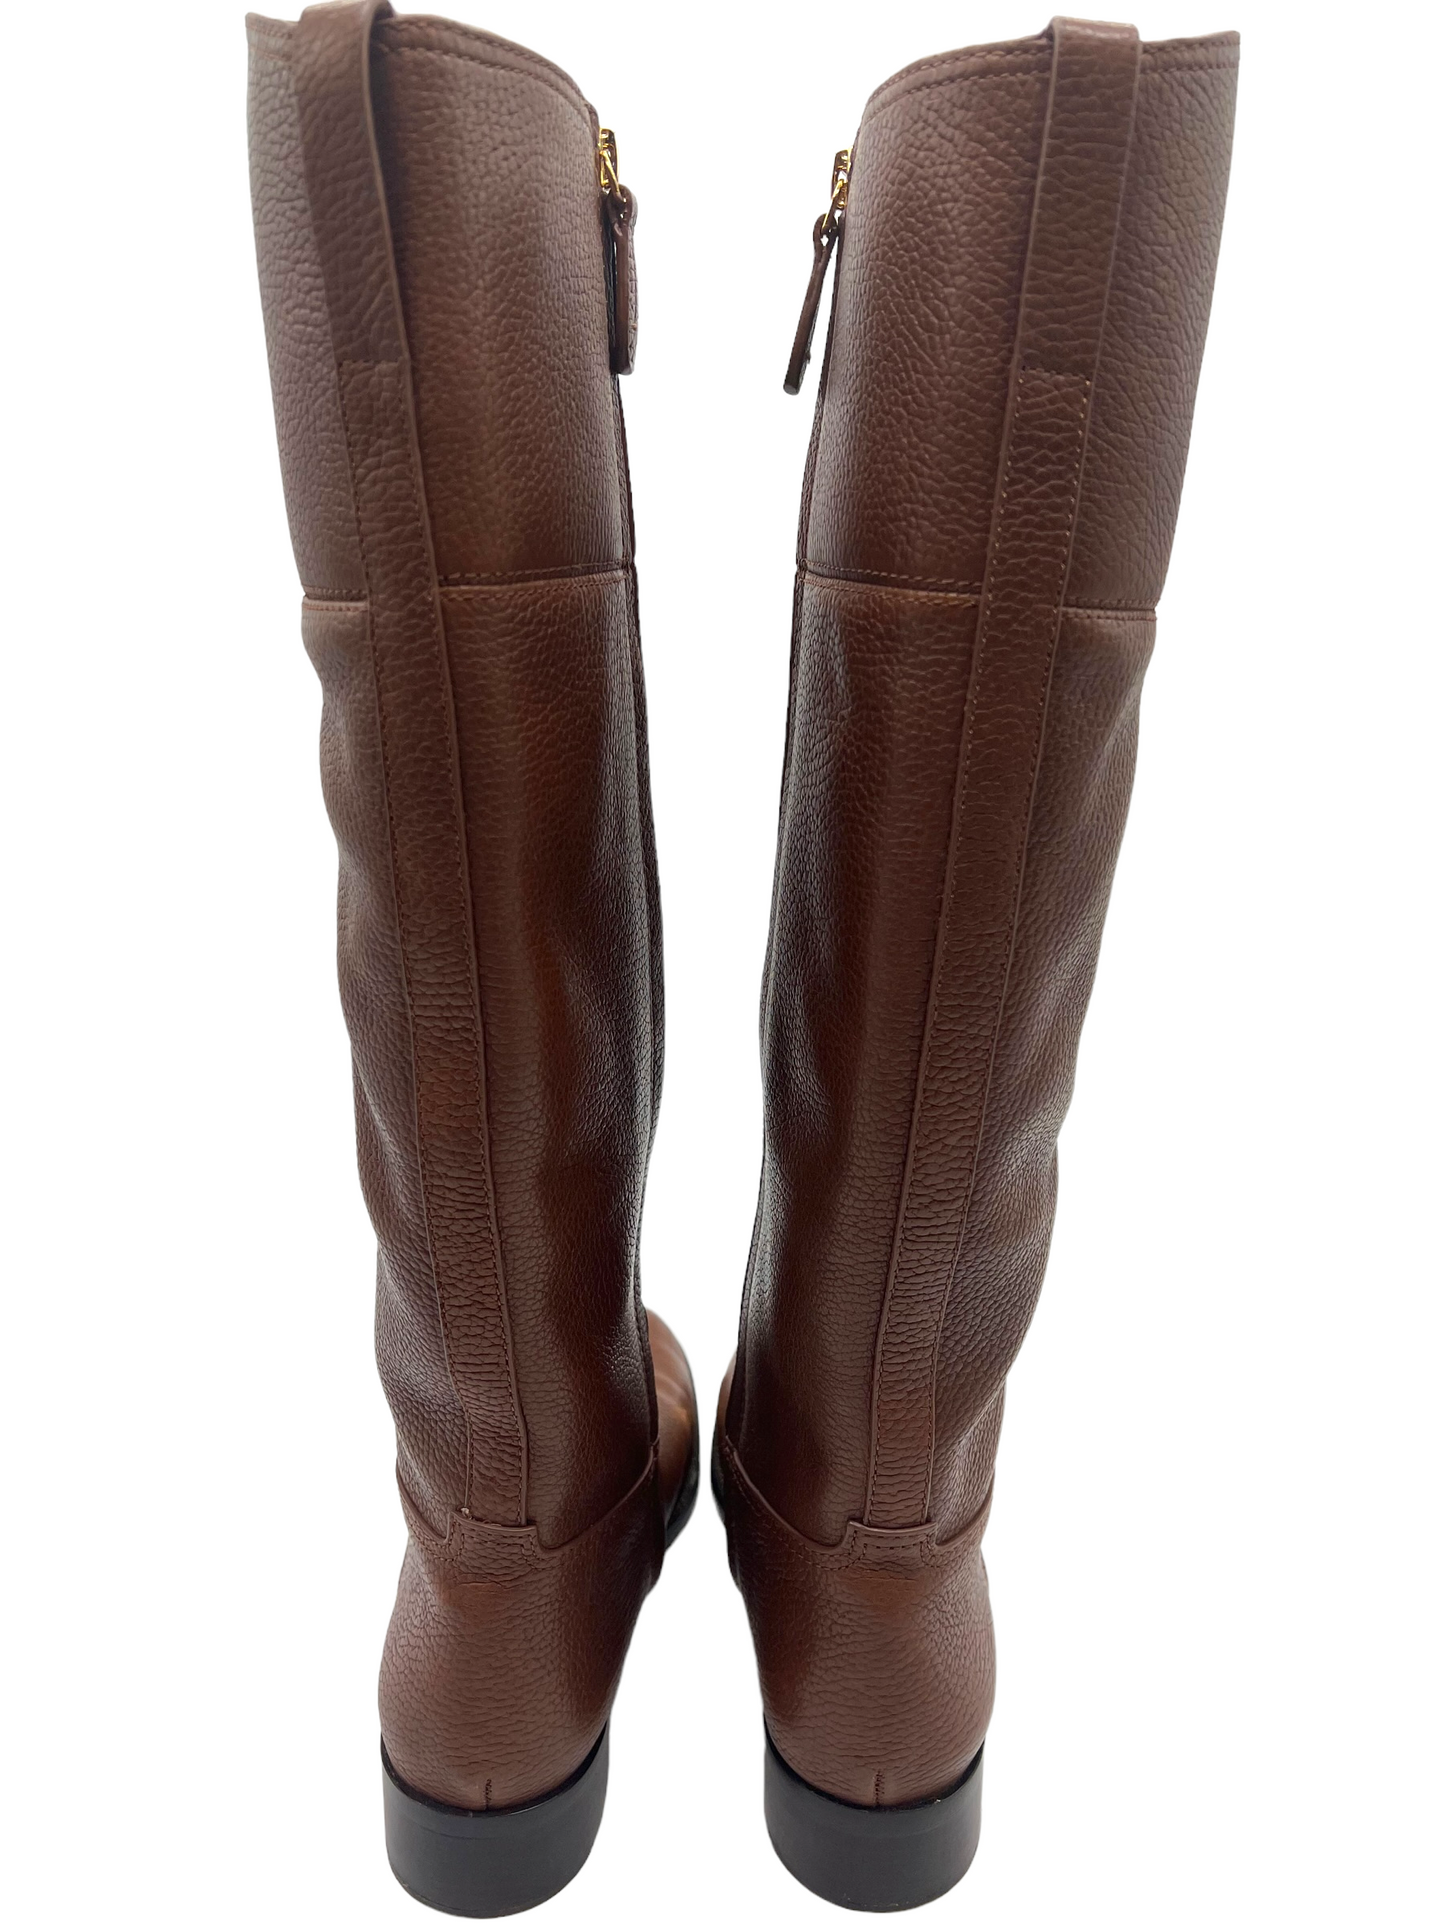 Tory Burch Brown Leather Junction Size 8 Riding Boots